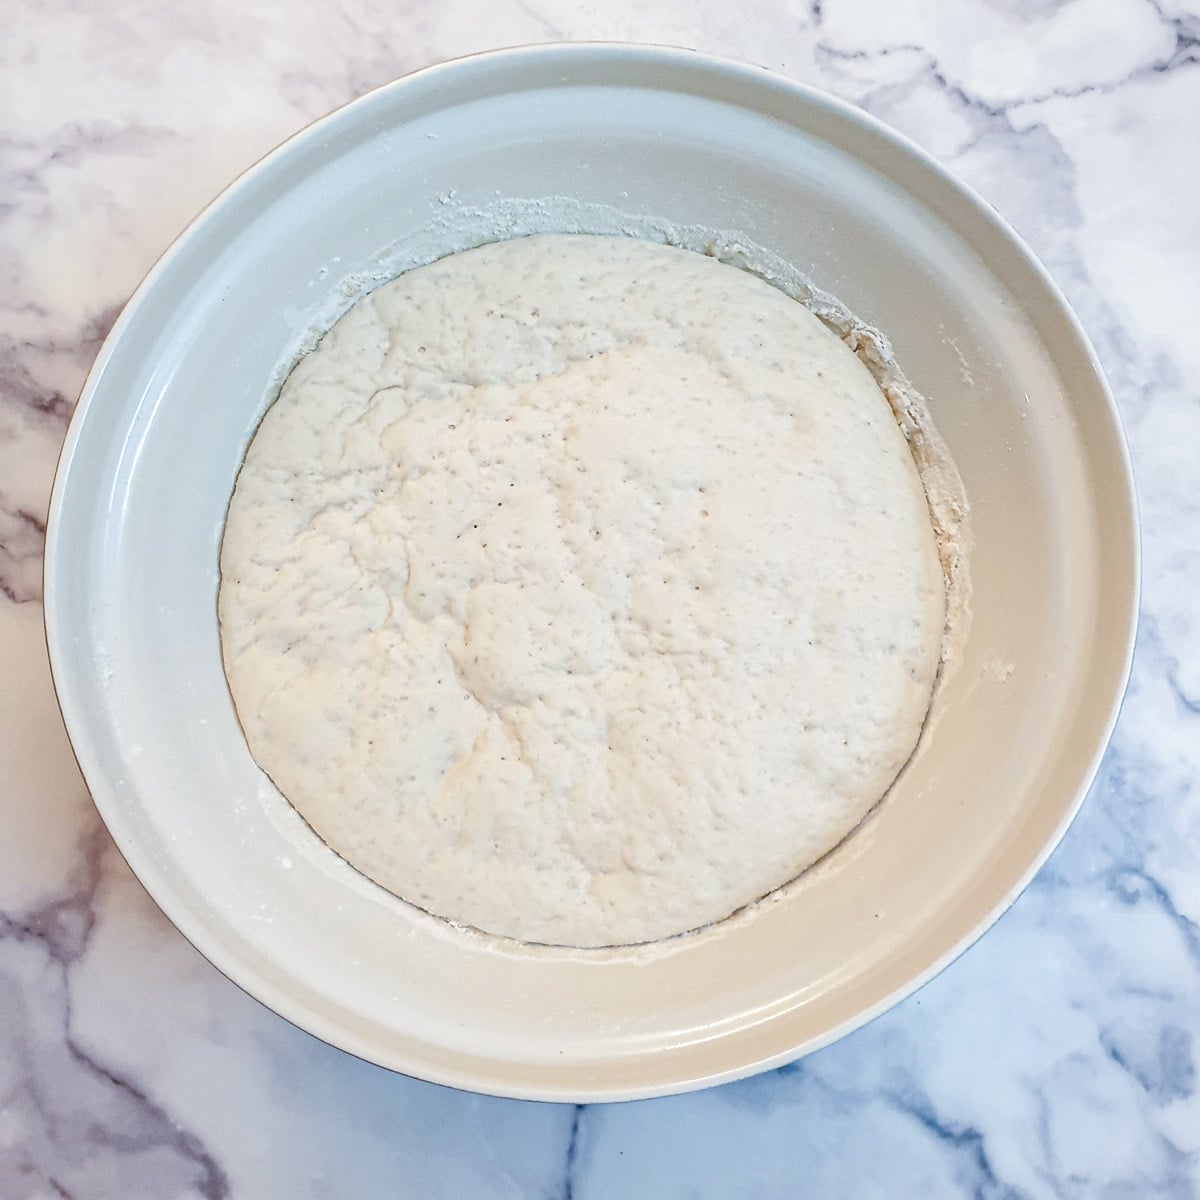 Focaccia dough that has been allowed to rise in a large mixing bowl.